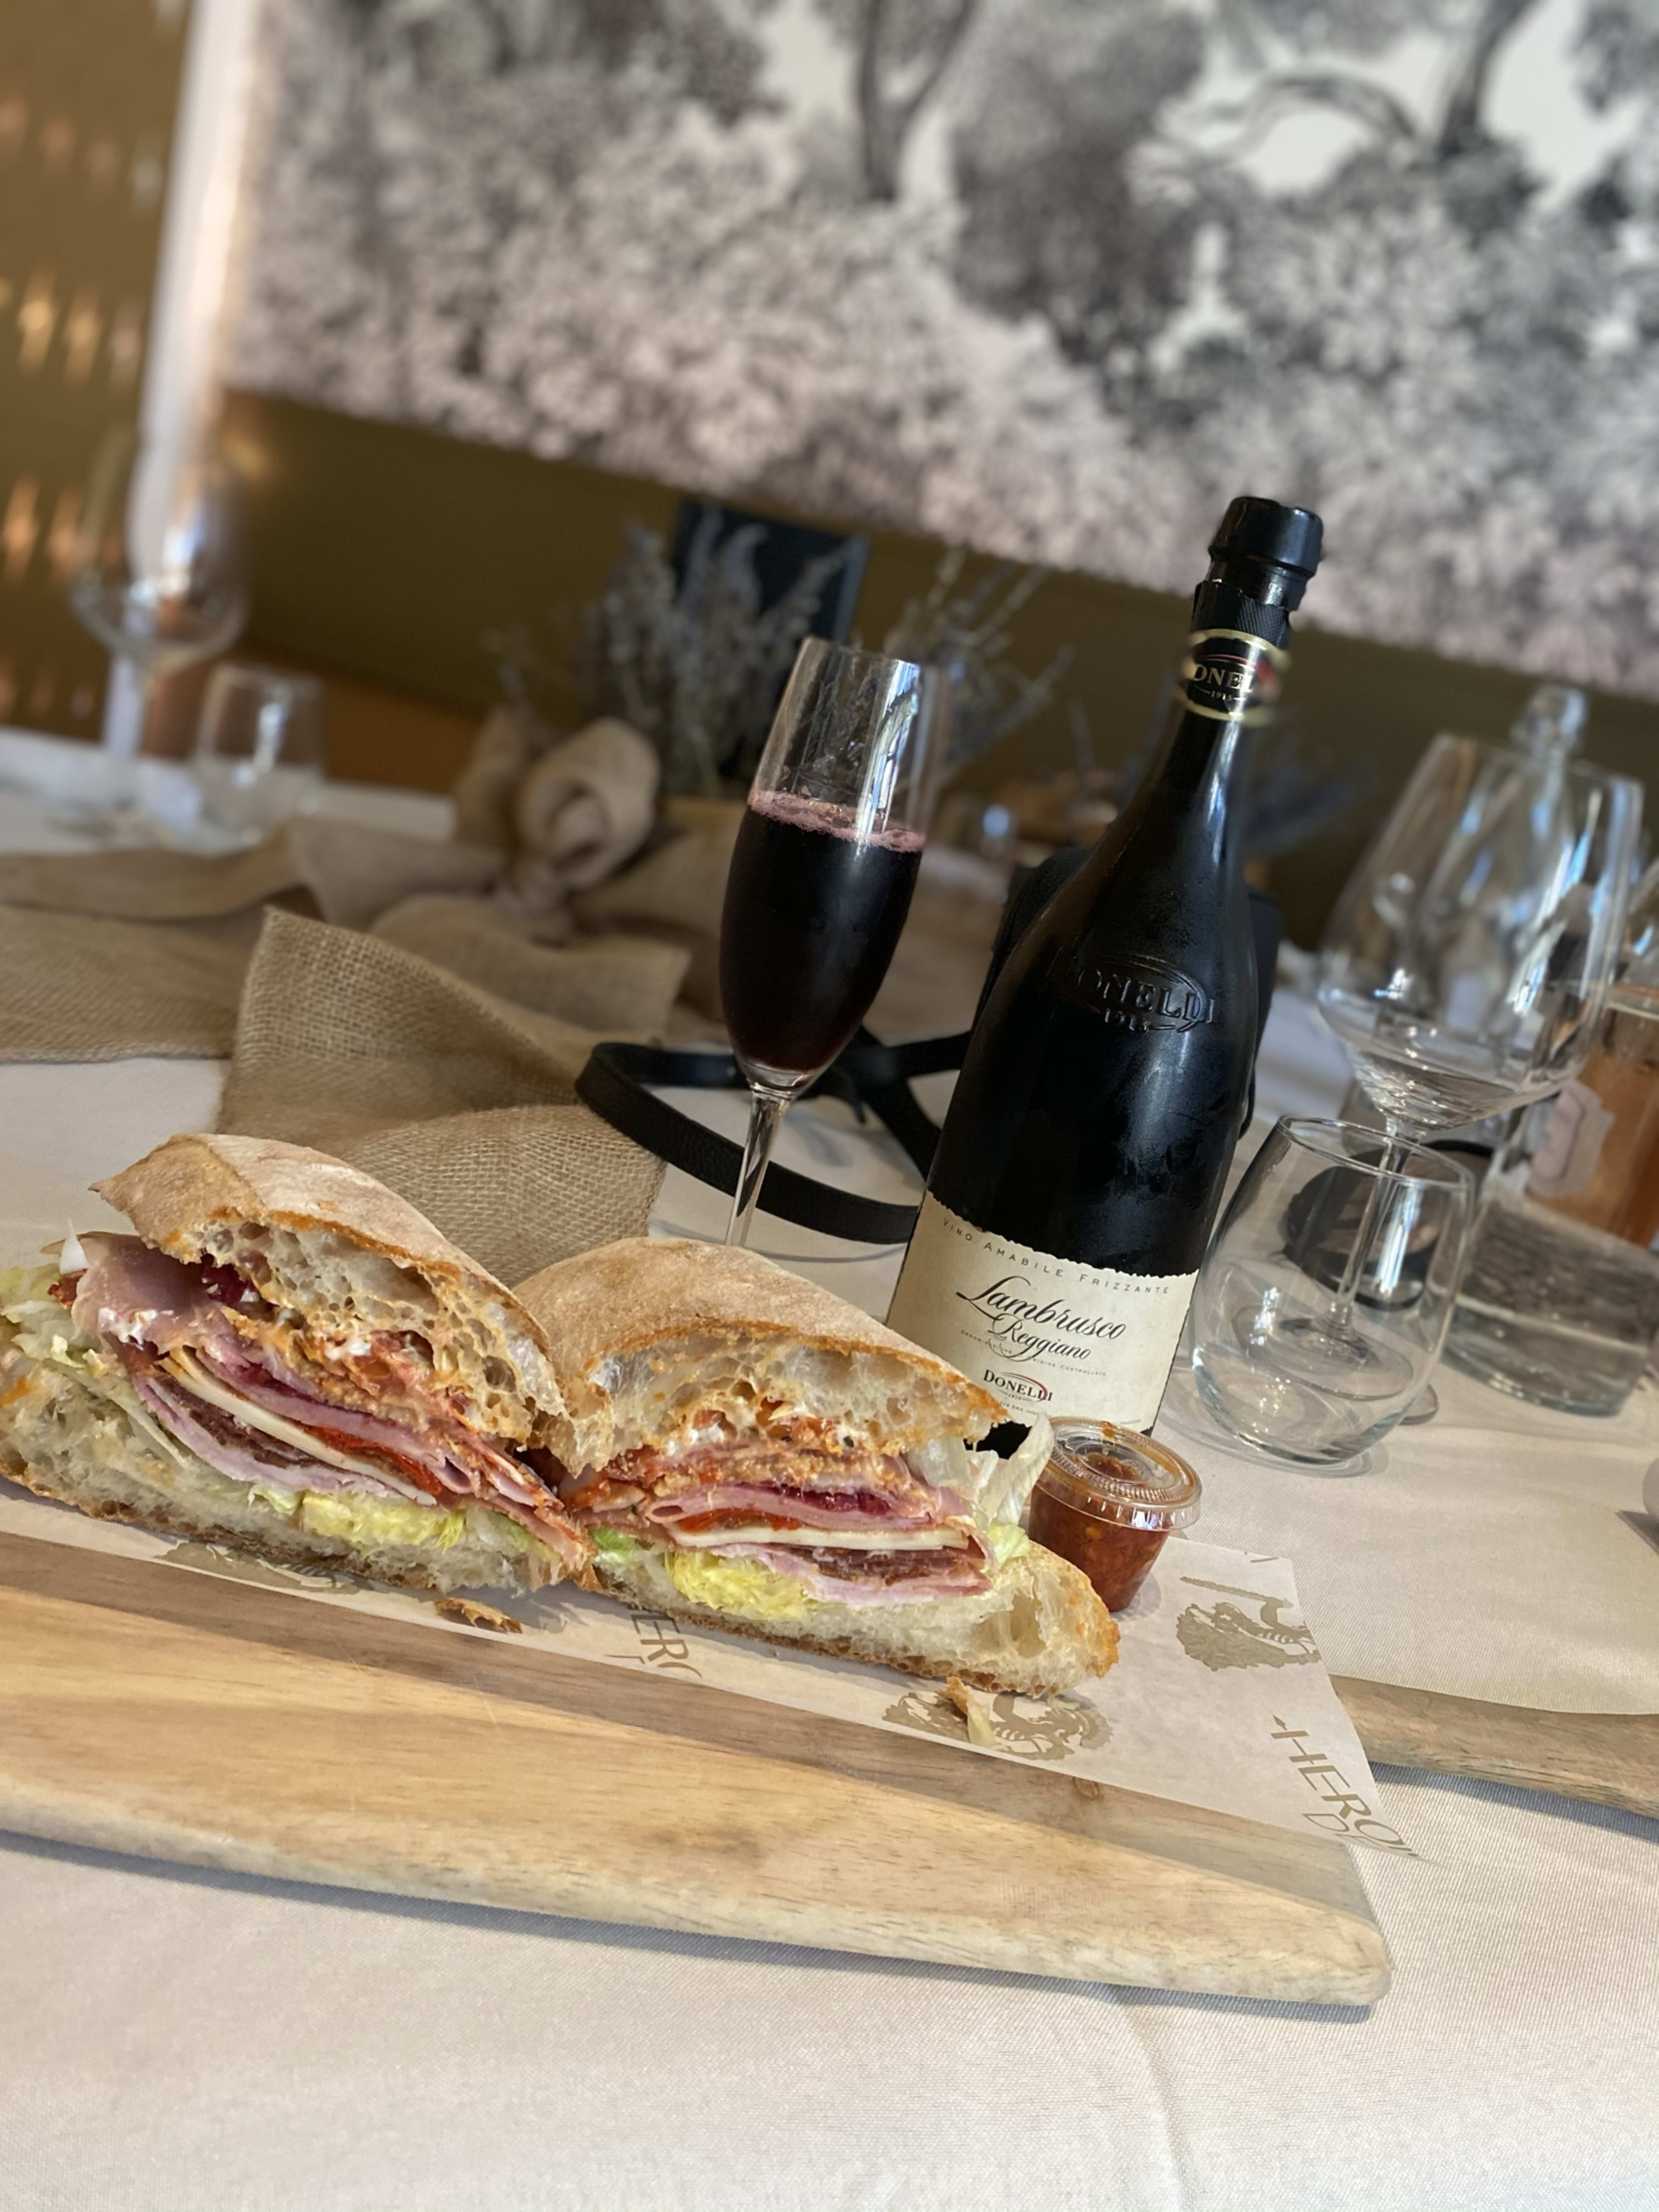 A sandwich on a cutting board next to a glass a red wine.